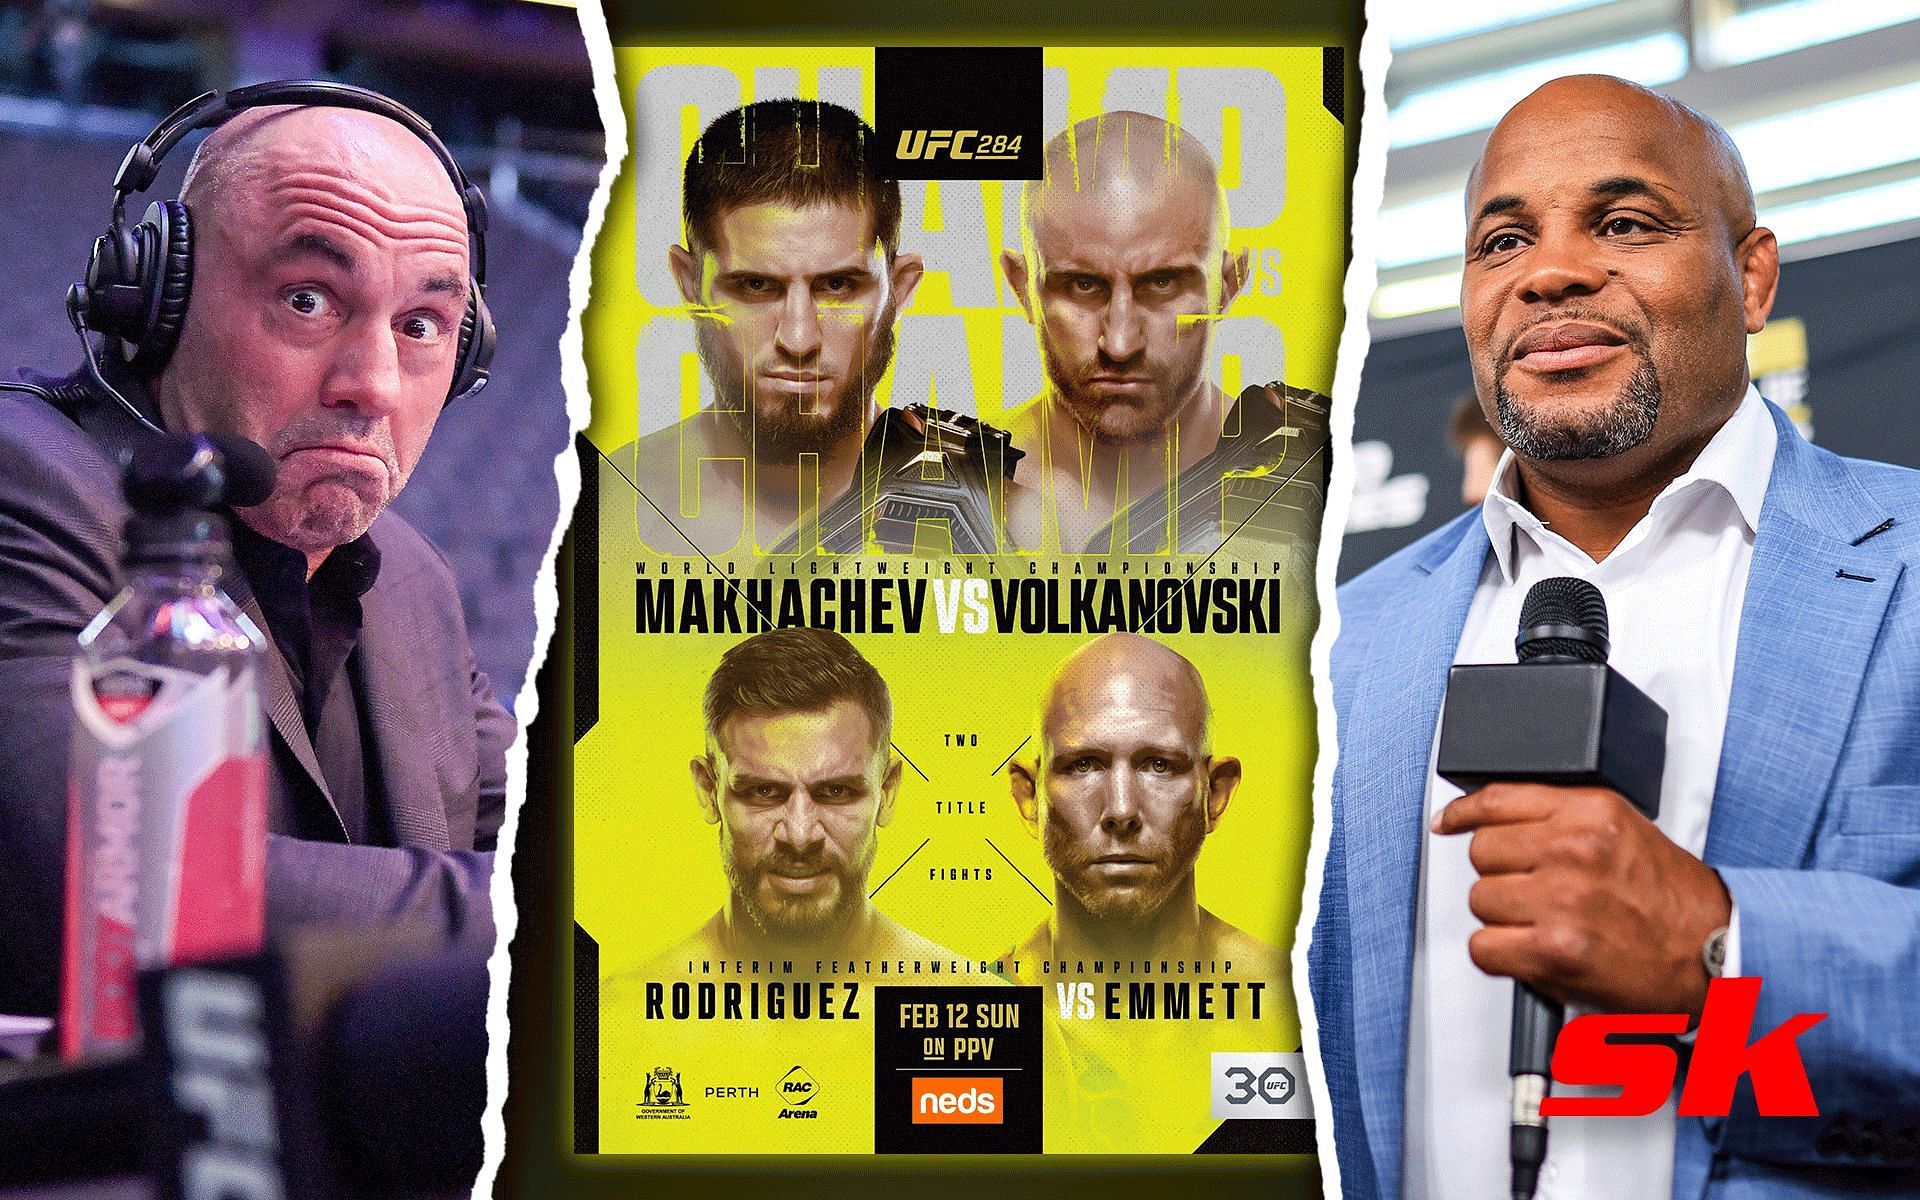 Joe Rogan (left), UFC 284 poster (centre) and Daniel Cormier (right) [Image Credits: Getty images and @UFC_AUSNZ on Twitter] 